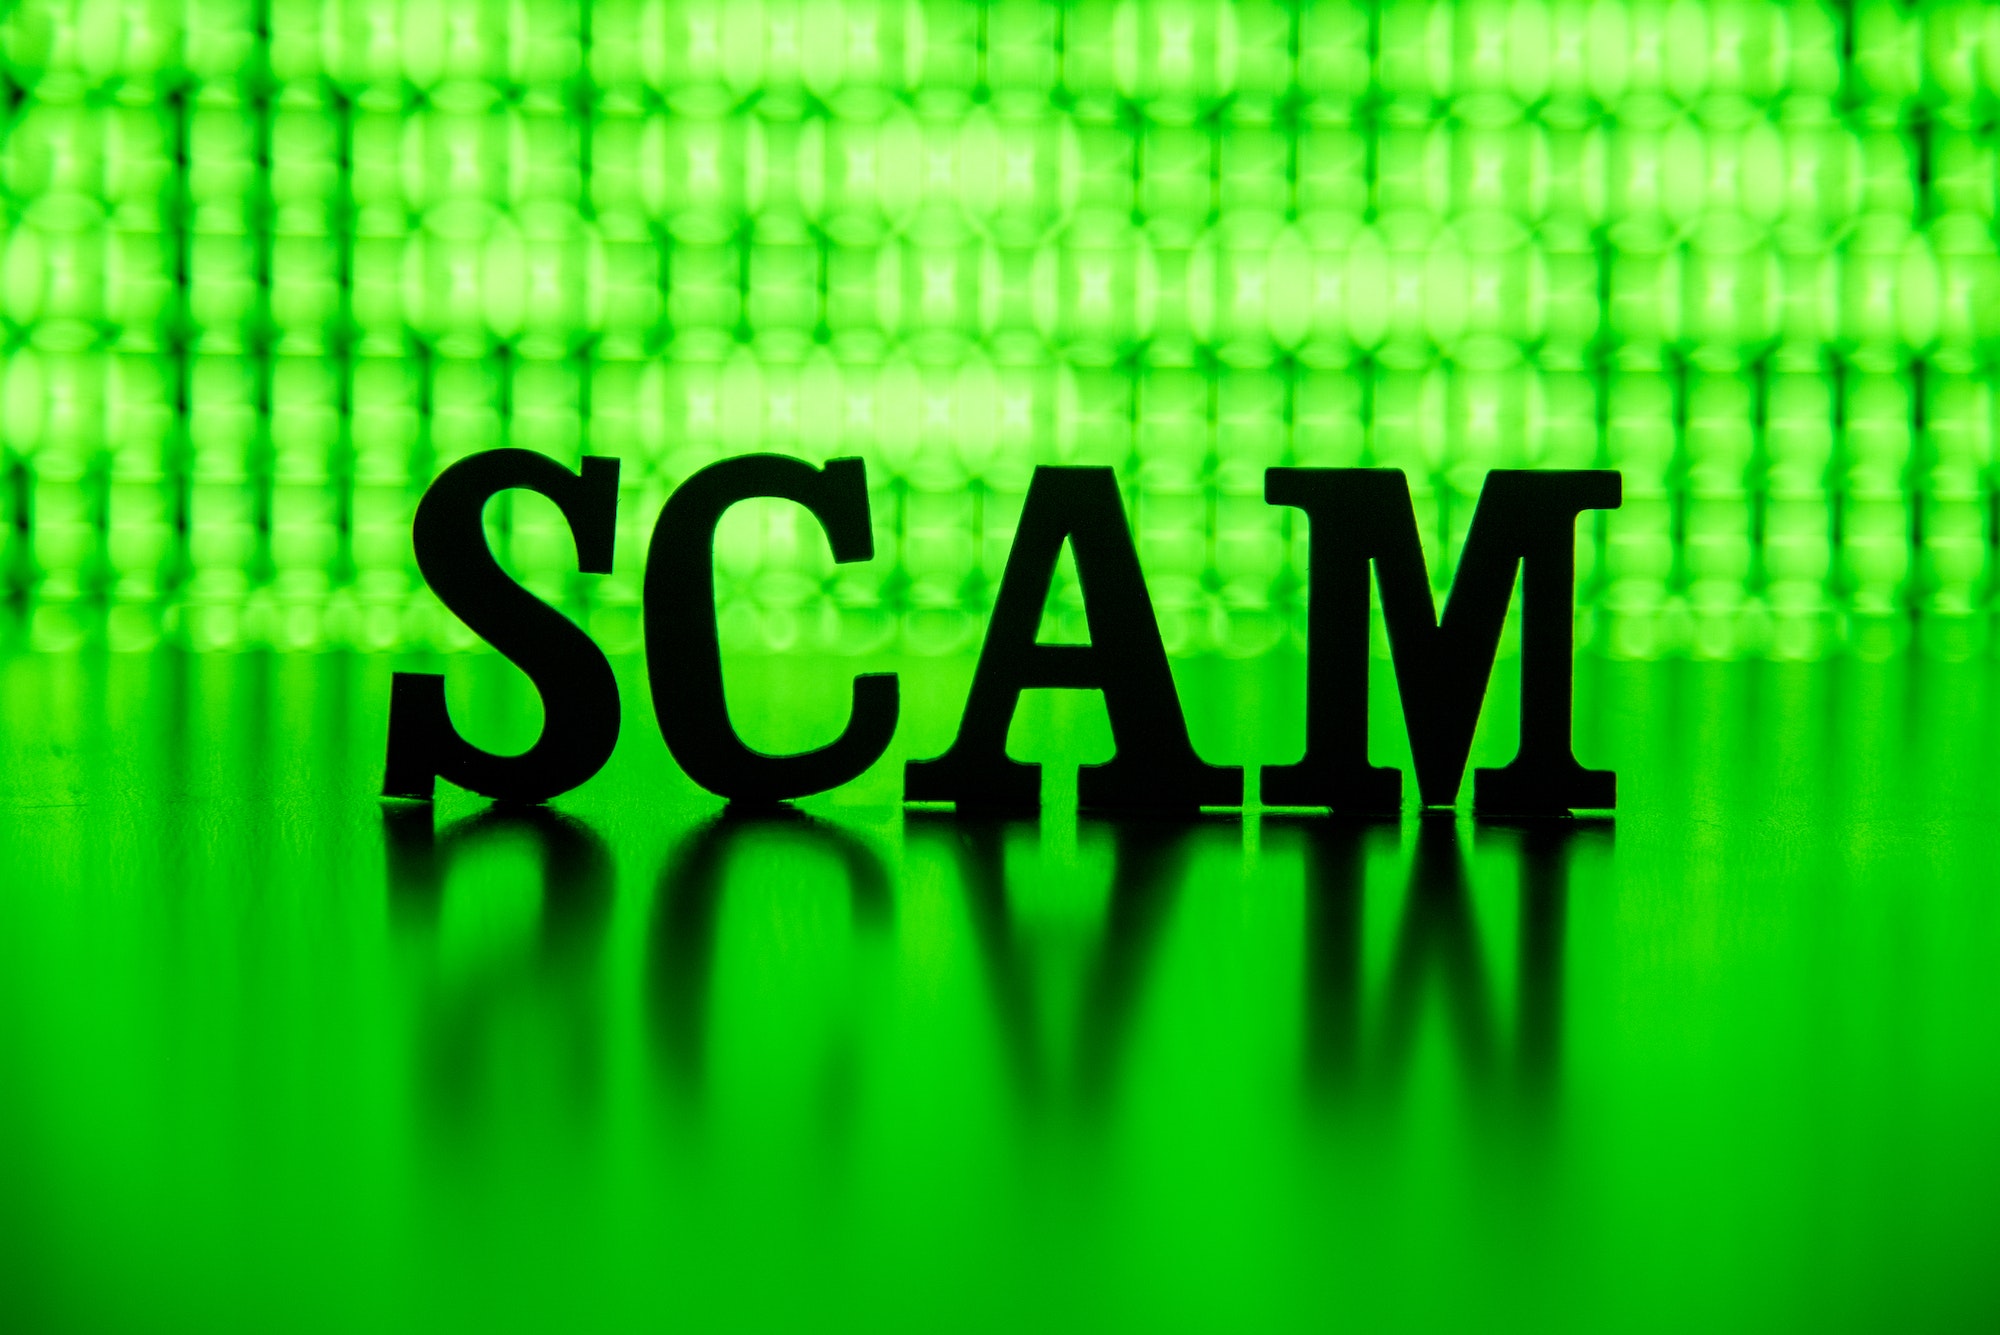 SCAM spelled out backlit by green